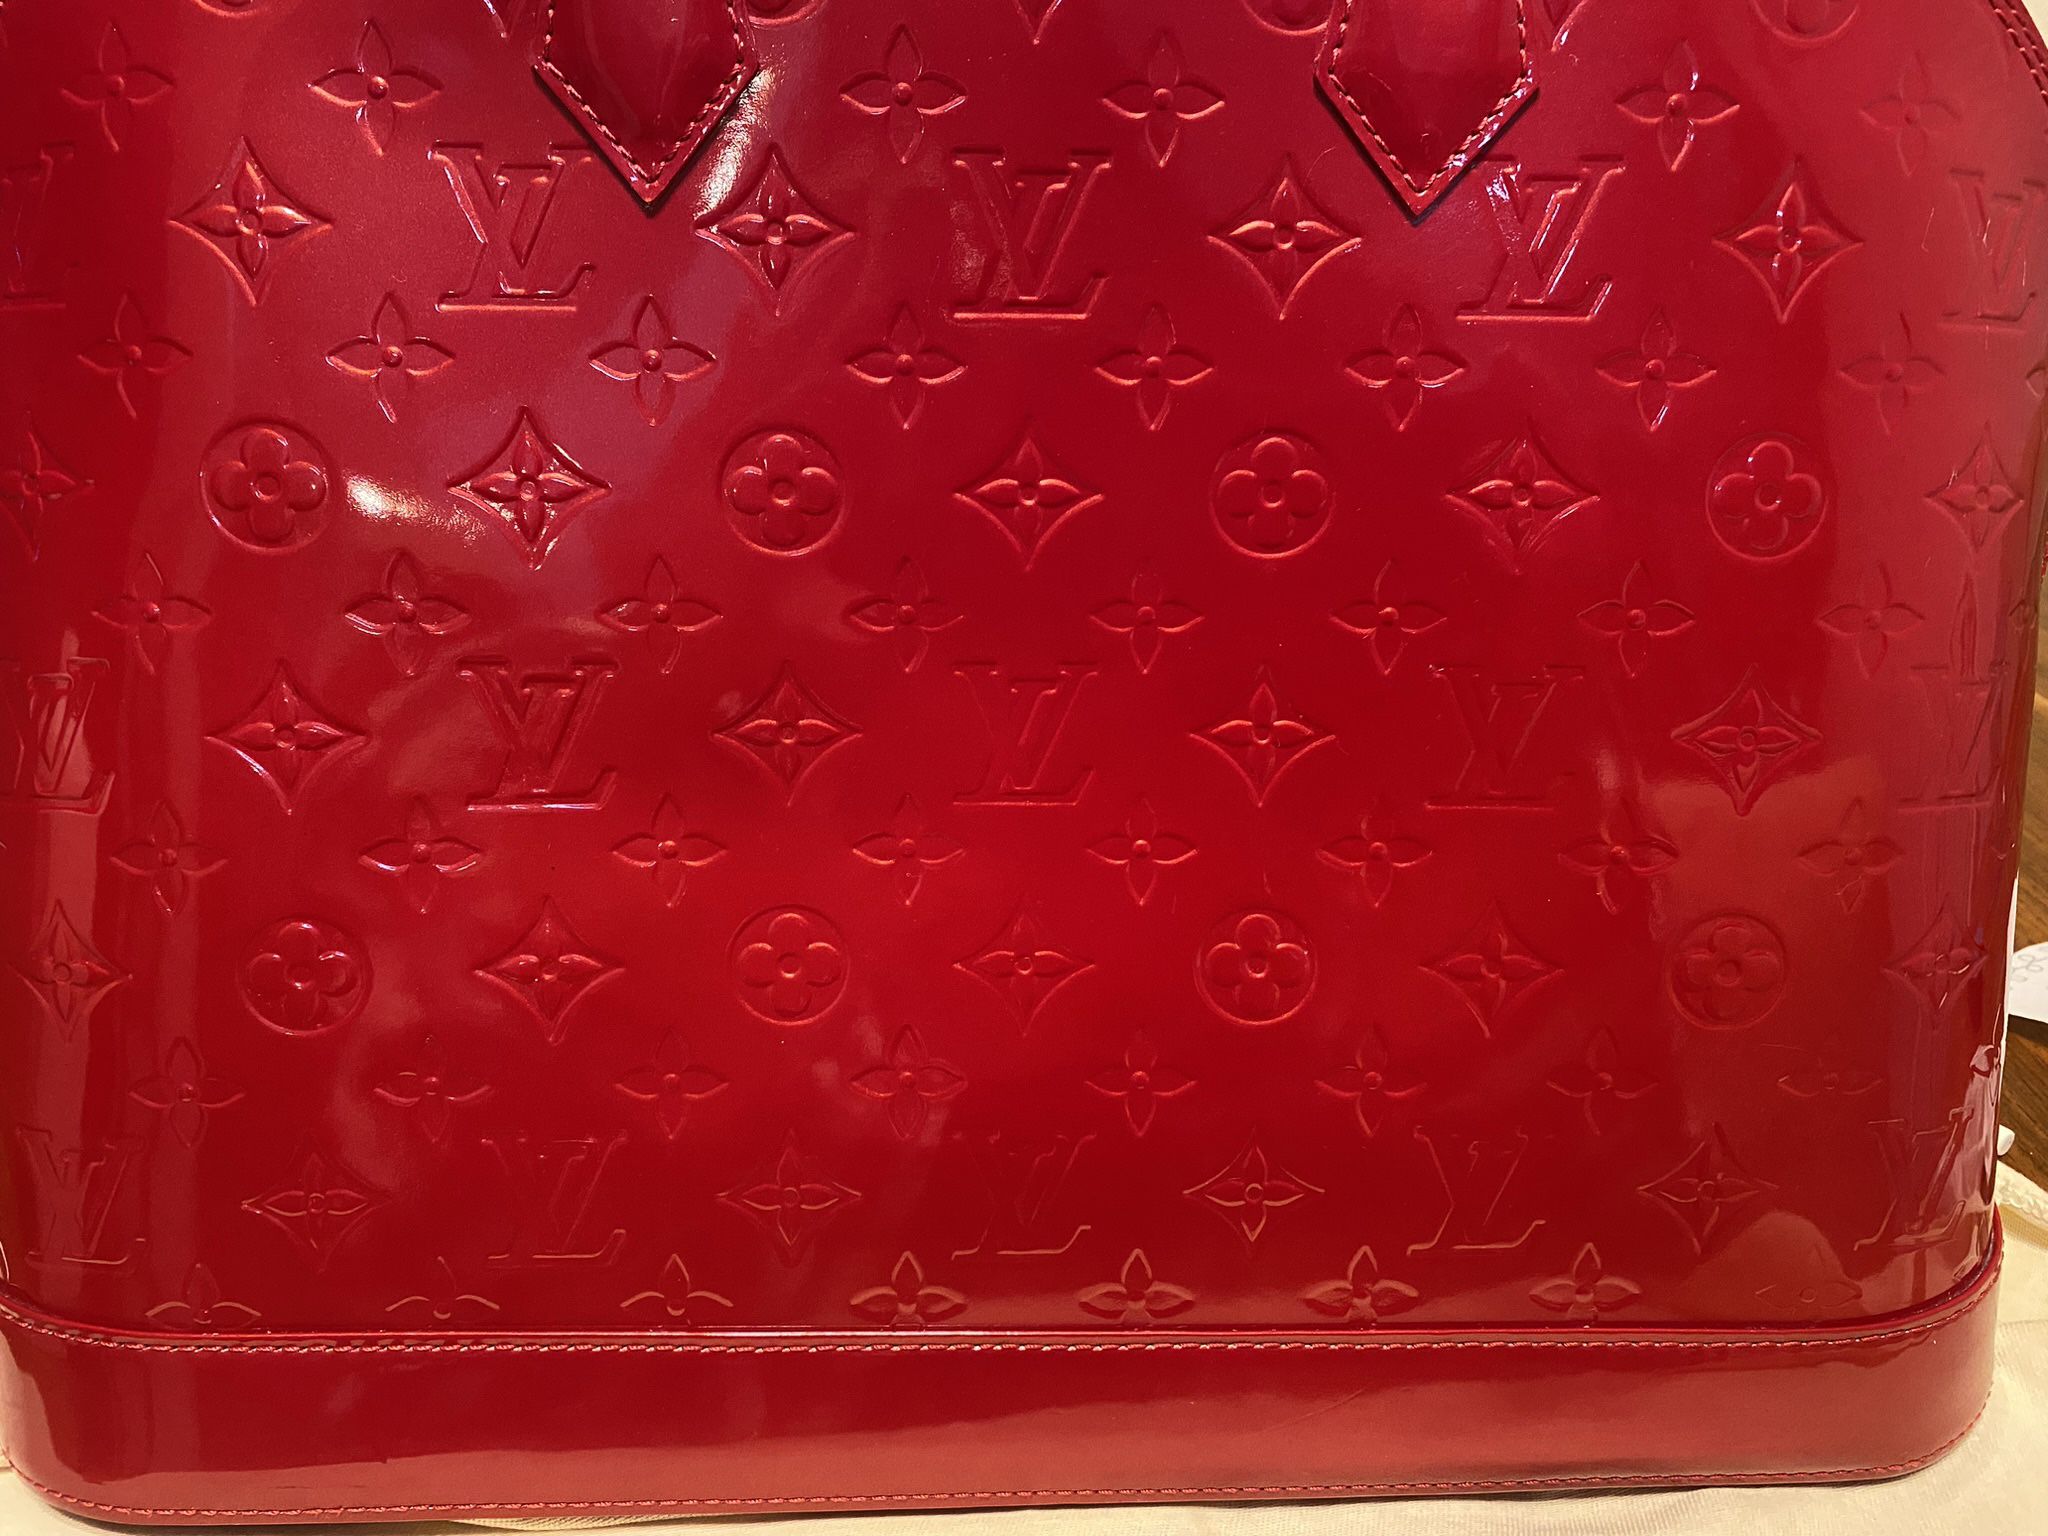 Data Visualization Case Study: Louis Vuitton Alma Monogram Vernis, by  Mailys, Trendful